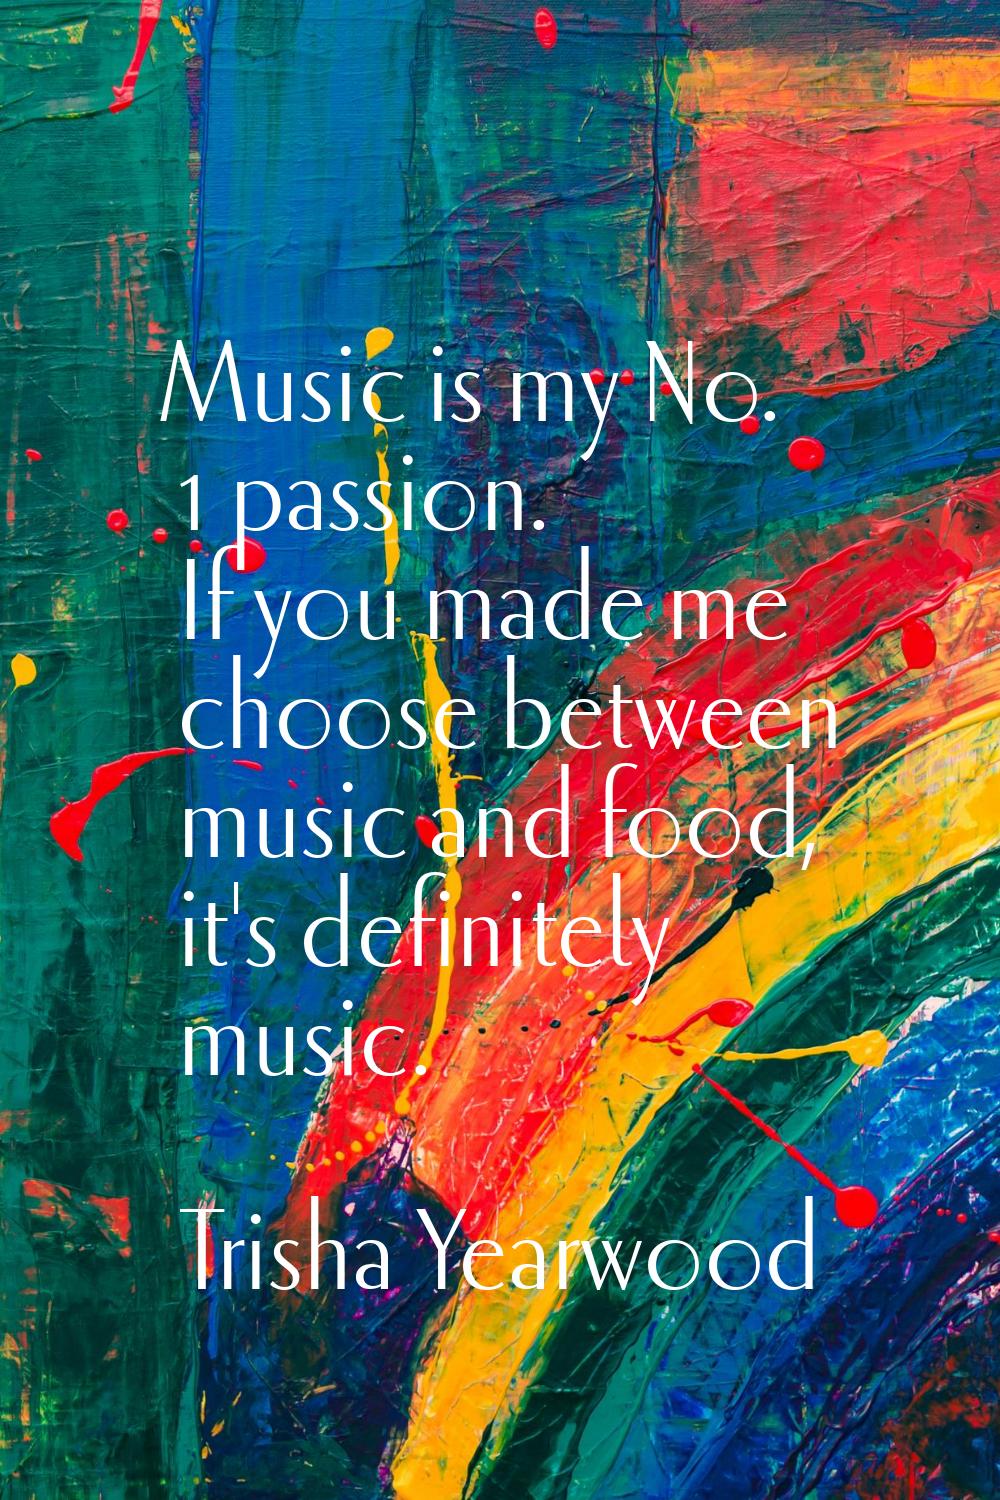 Music is my No. 1 passion. If you made me choose between music and food, it's definitely music.